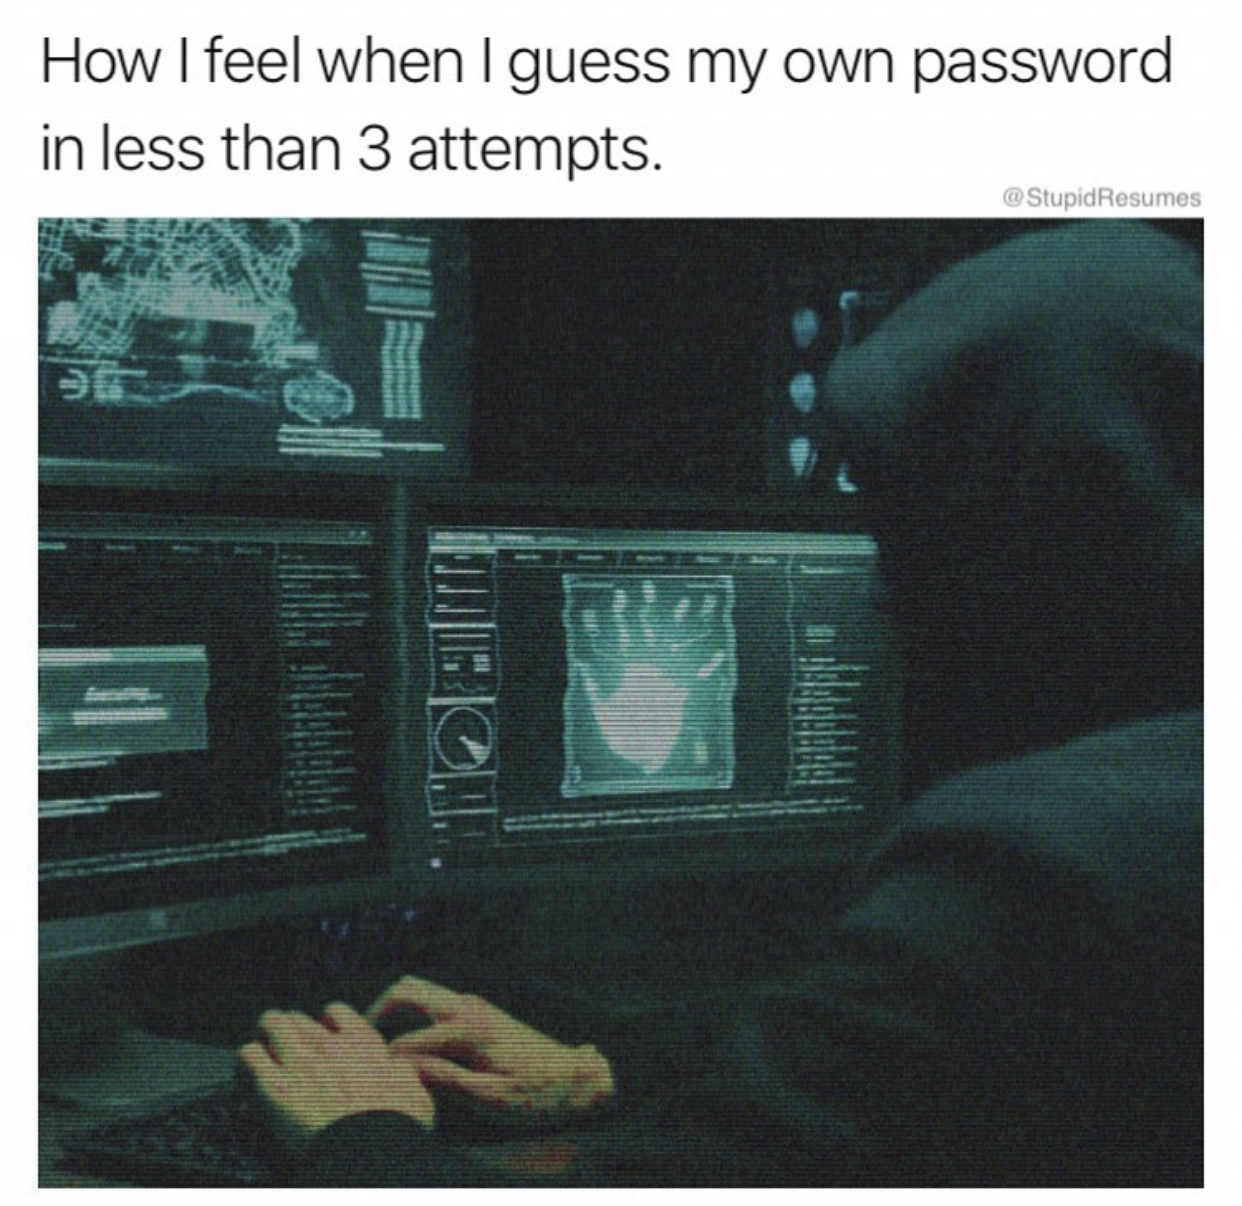 multimedia - How I feel when I guess my own password in less than 3 attempts.